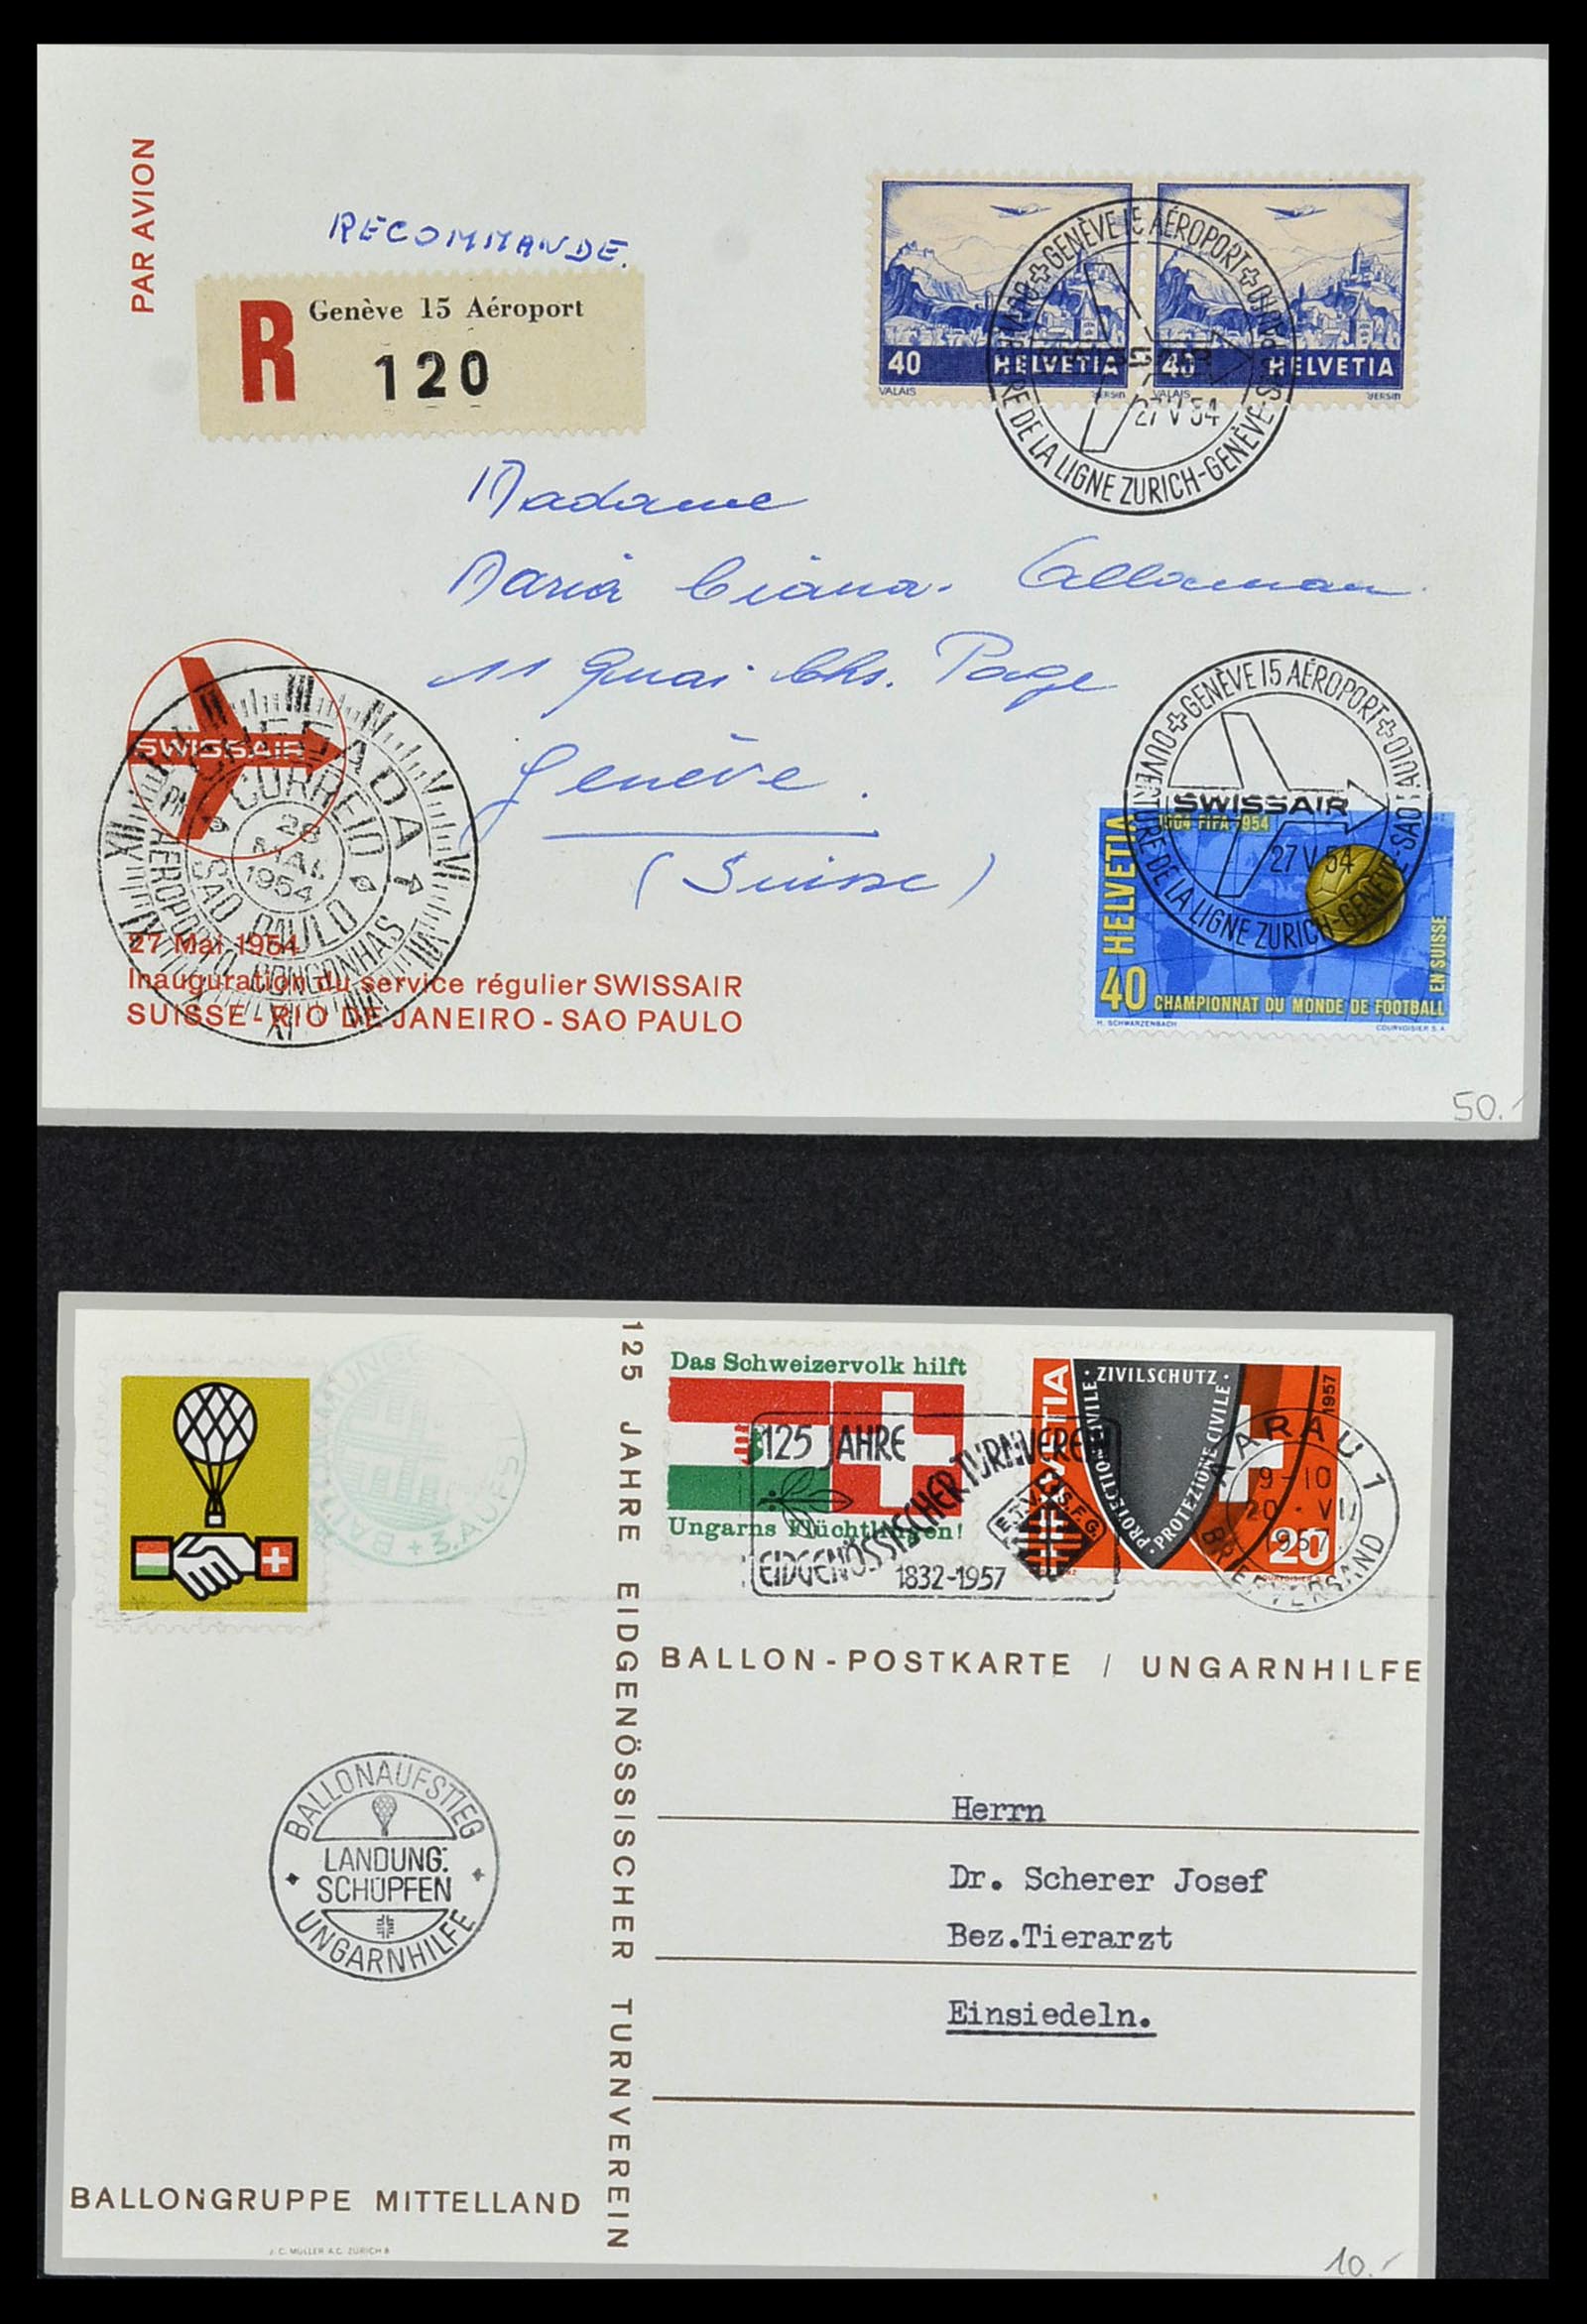 34141 053 - Stamp collection 34141 Switzerland airmail covers 1920-1960.